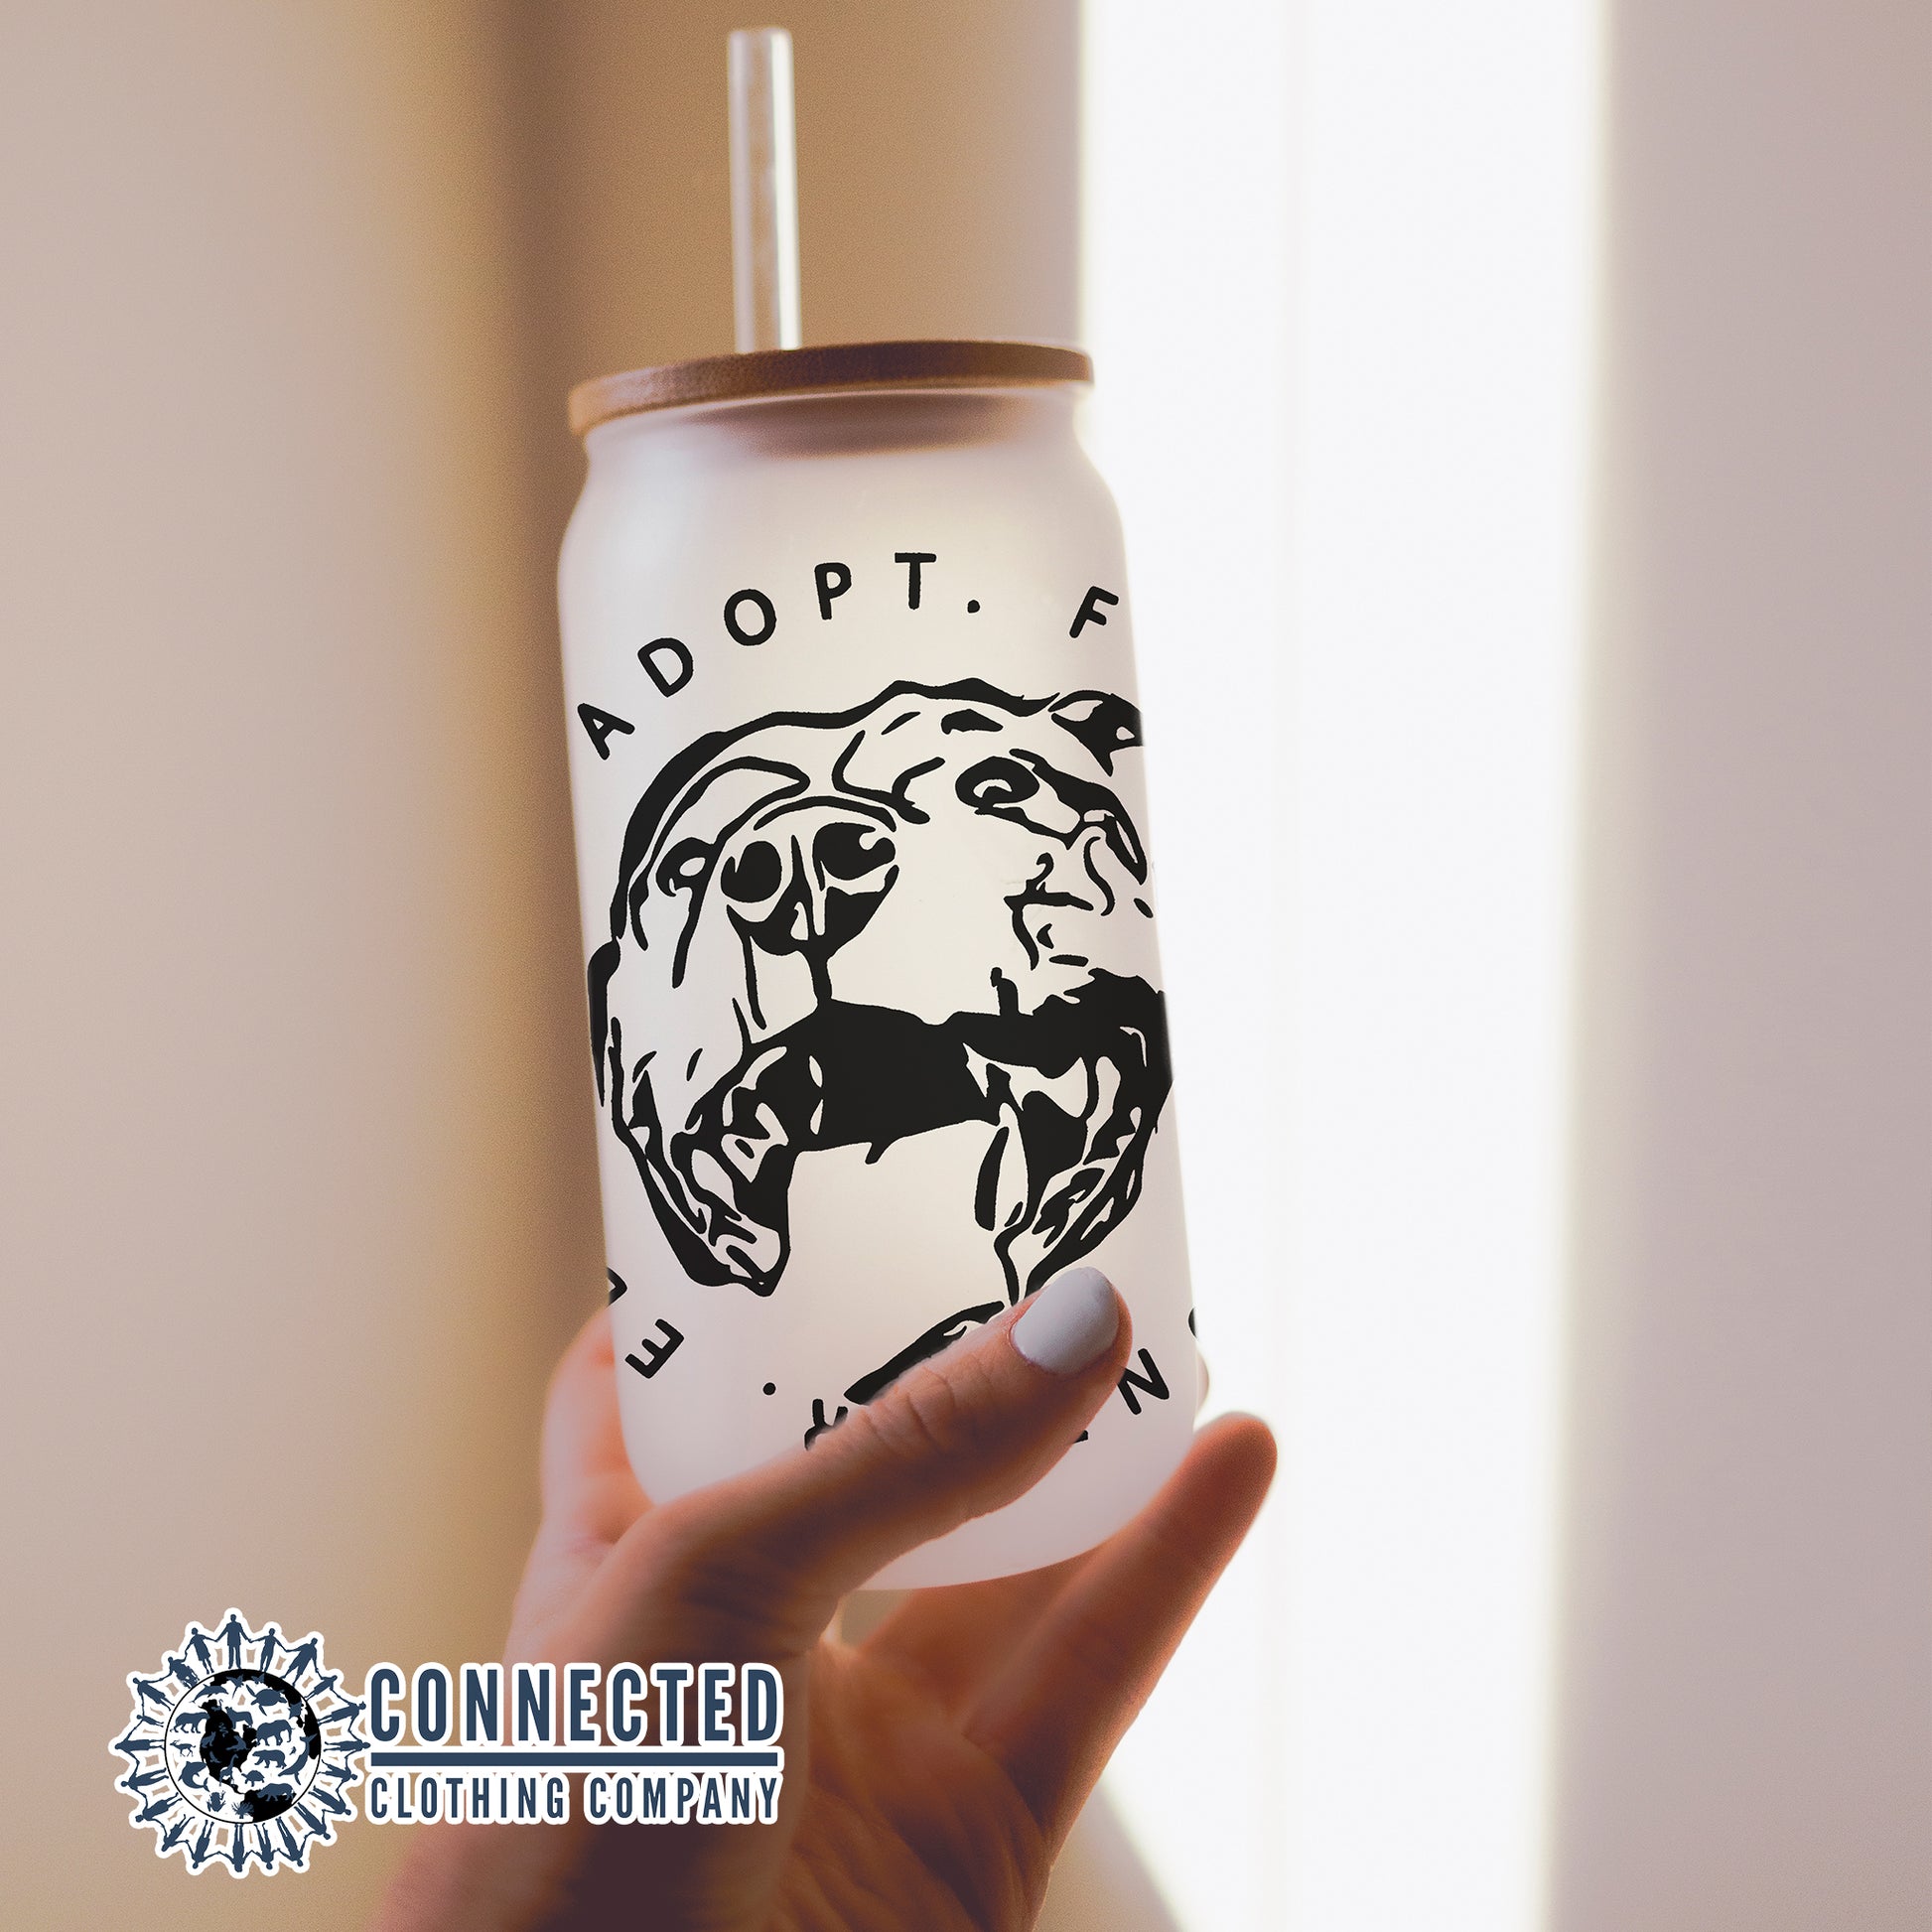 Adopt Educate Foster Volunteer Glass Can - Connected Clothing Company - 10% of the proceeds are donated to animal rescue